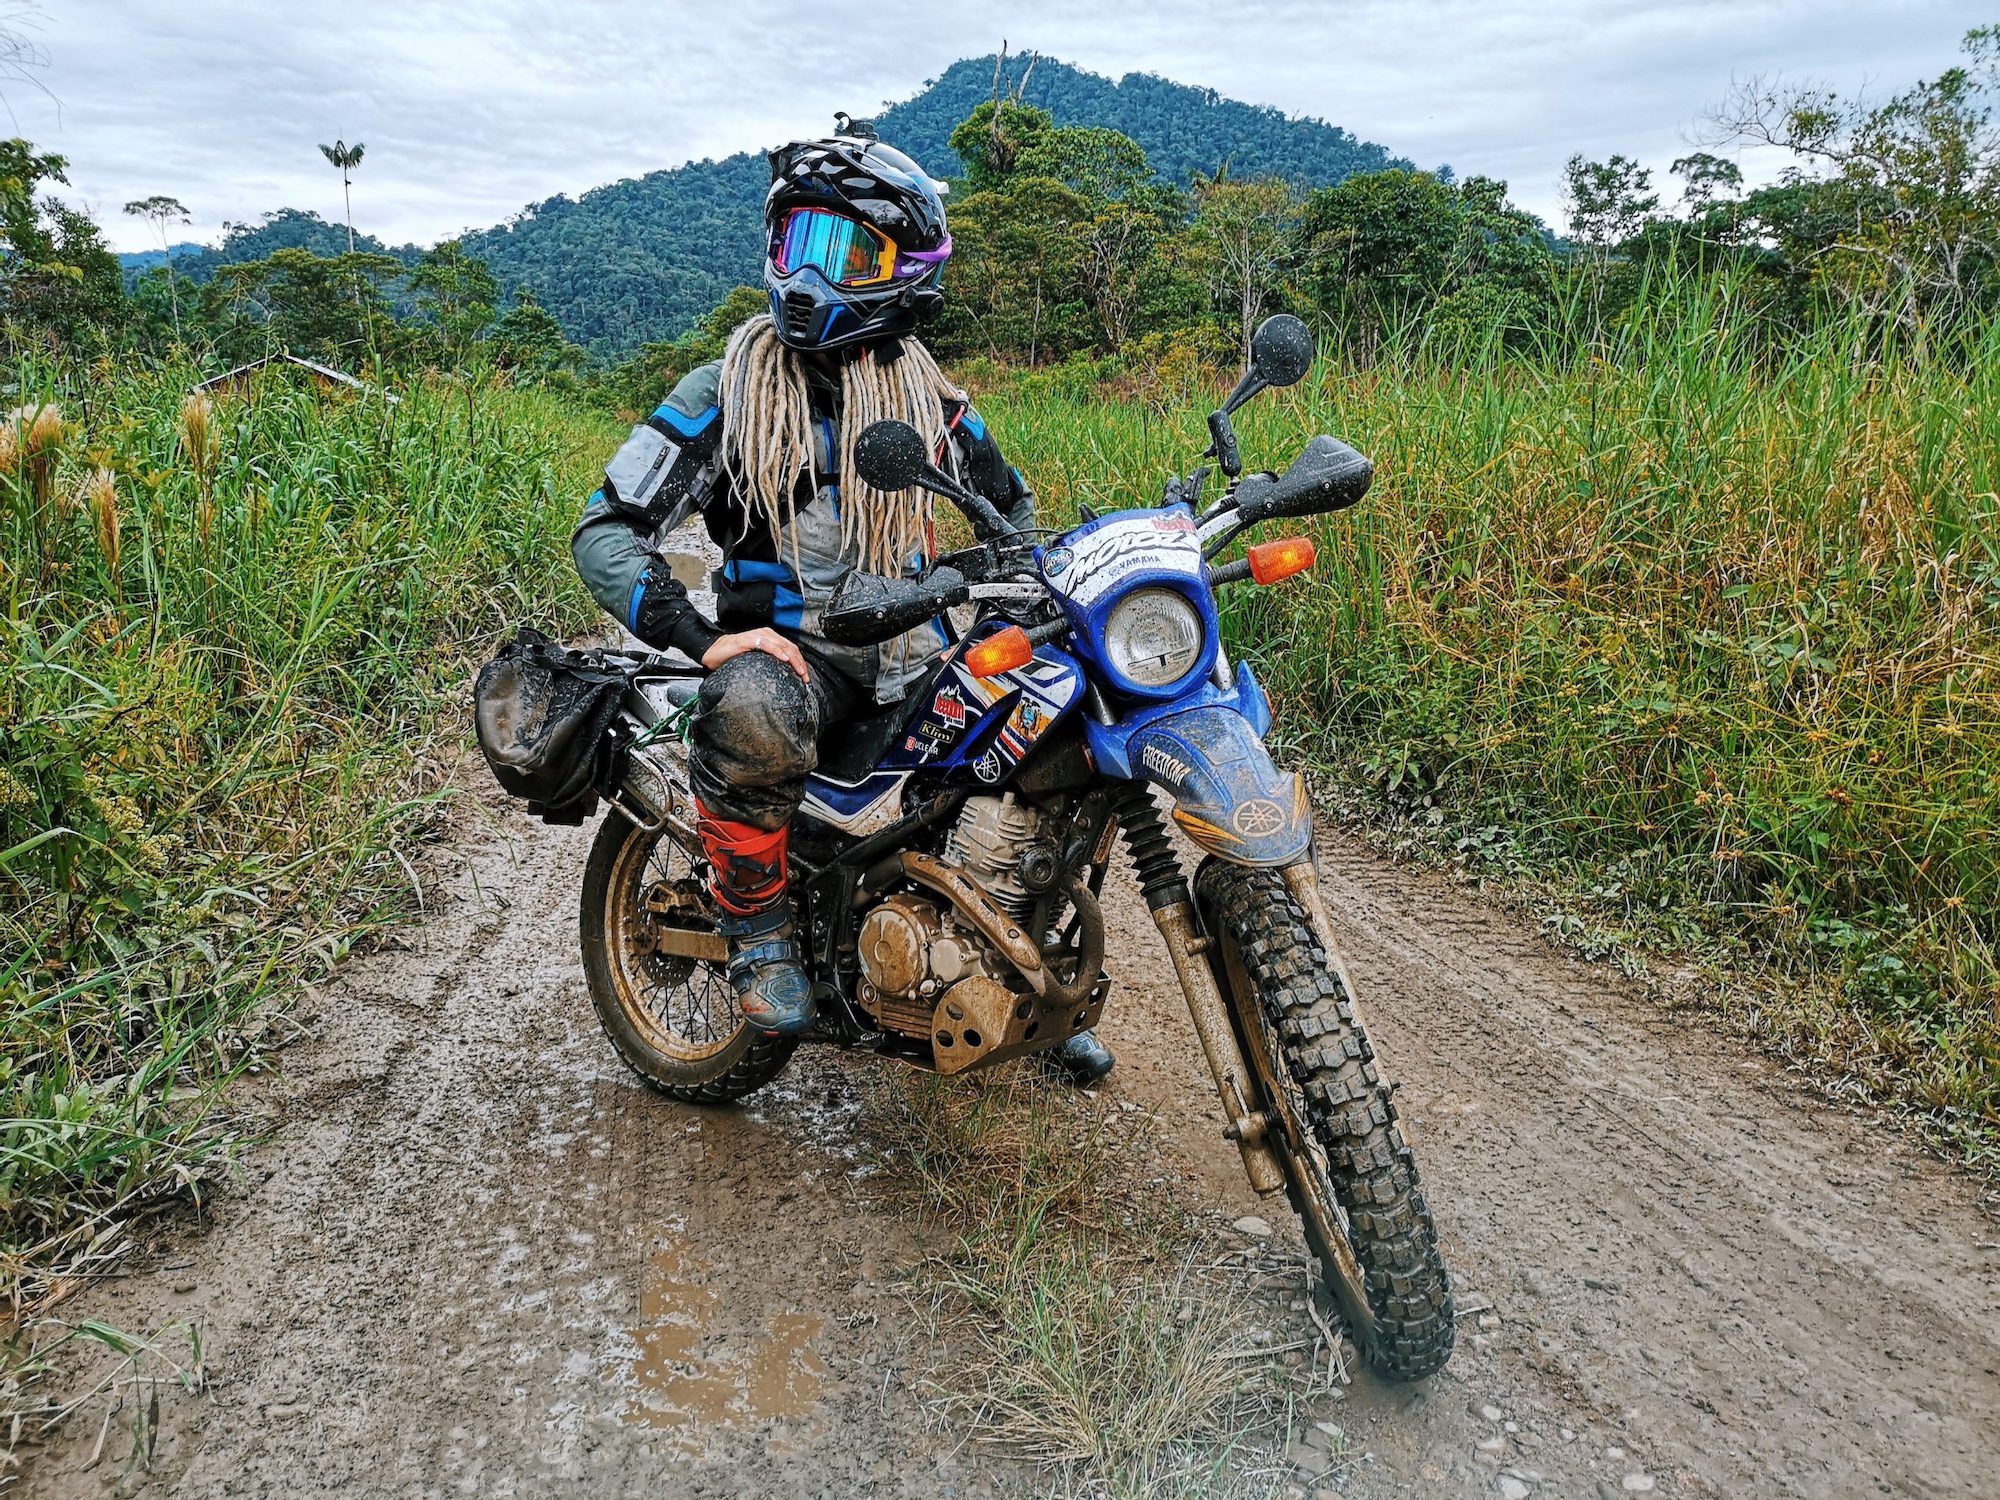 A female motorcyclist enjoying a pretty day int eh mud, on her machine of choice. Media sourced from Adventure Bound.